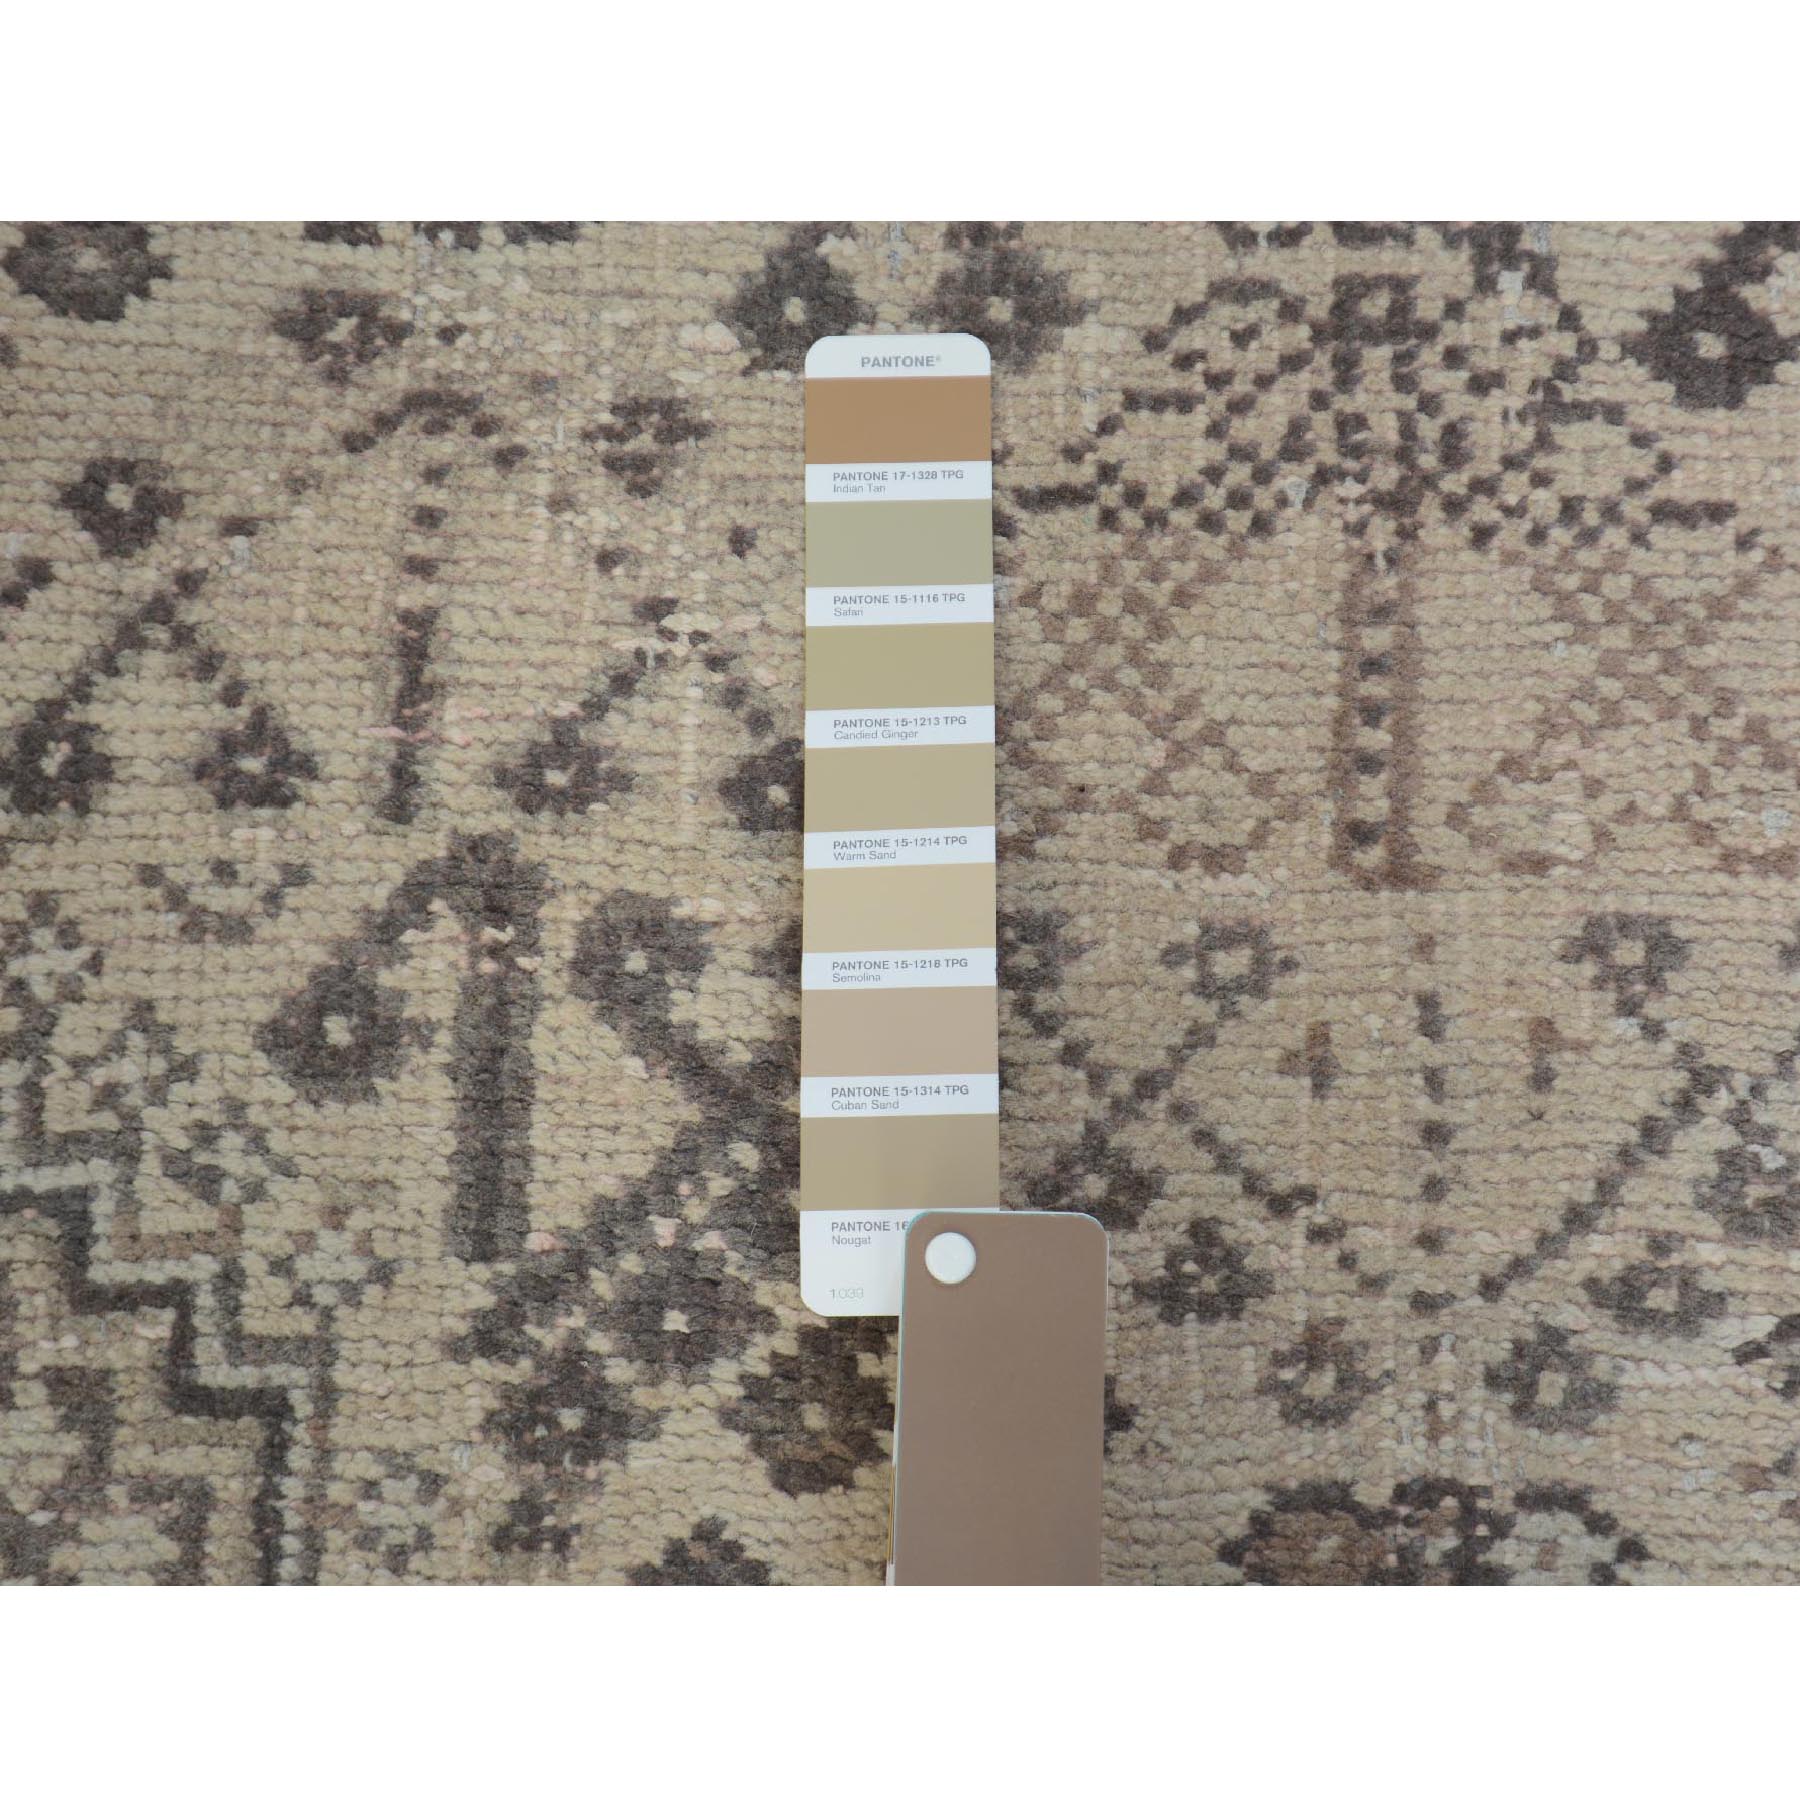 5-1 x7-4  Natural Colors Vintage And Worn Down Persian Qashqai Pure Wool Hand Knotted Oriental Rug 